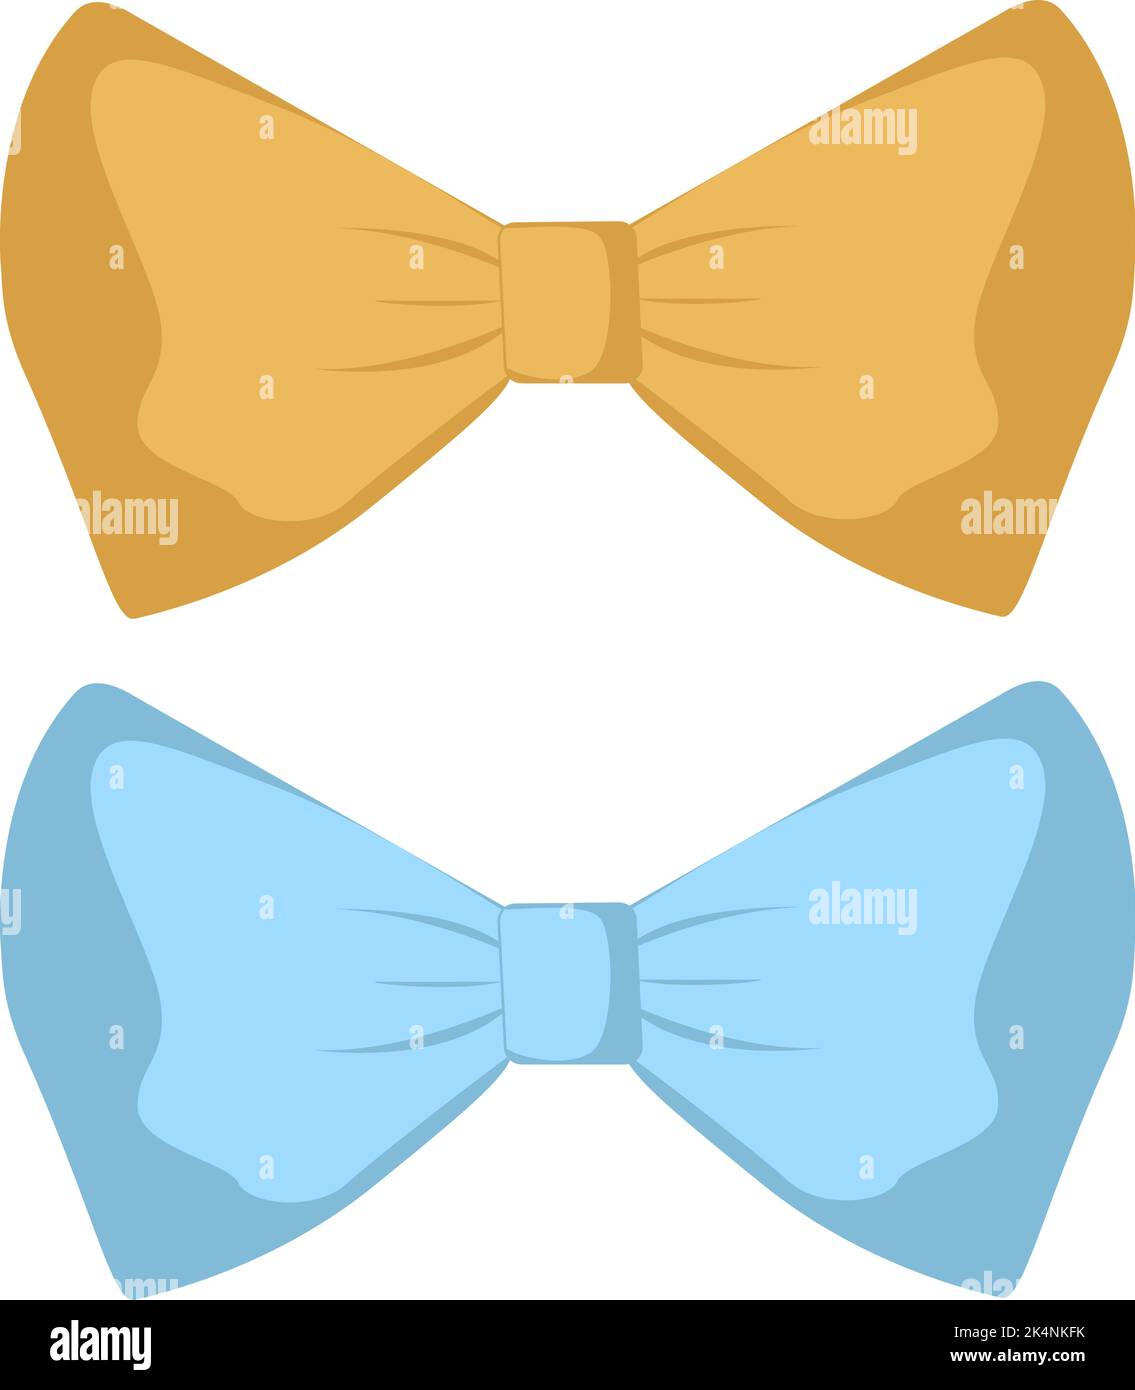 Yellow and blue bow ties, illustration, vector on a white background. Stock Vector